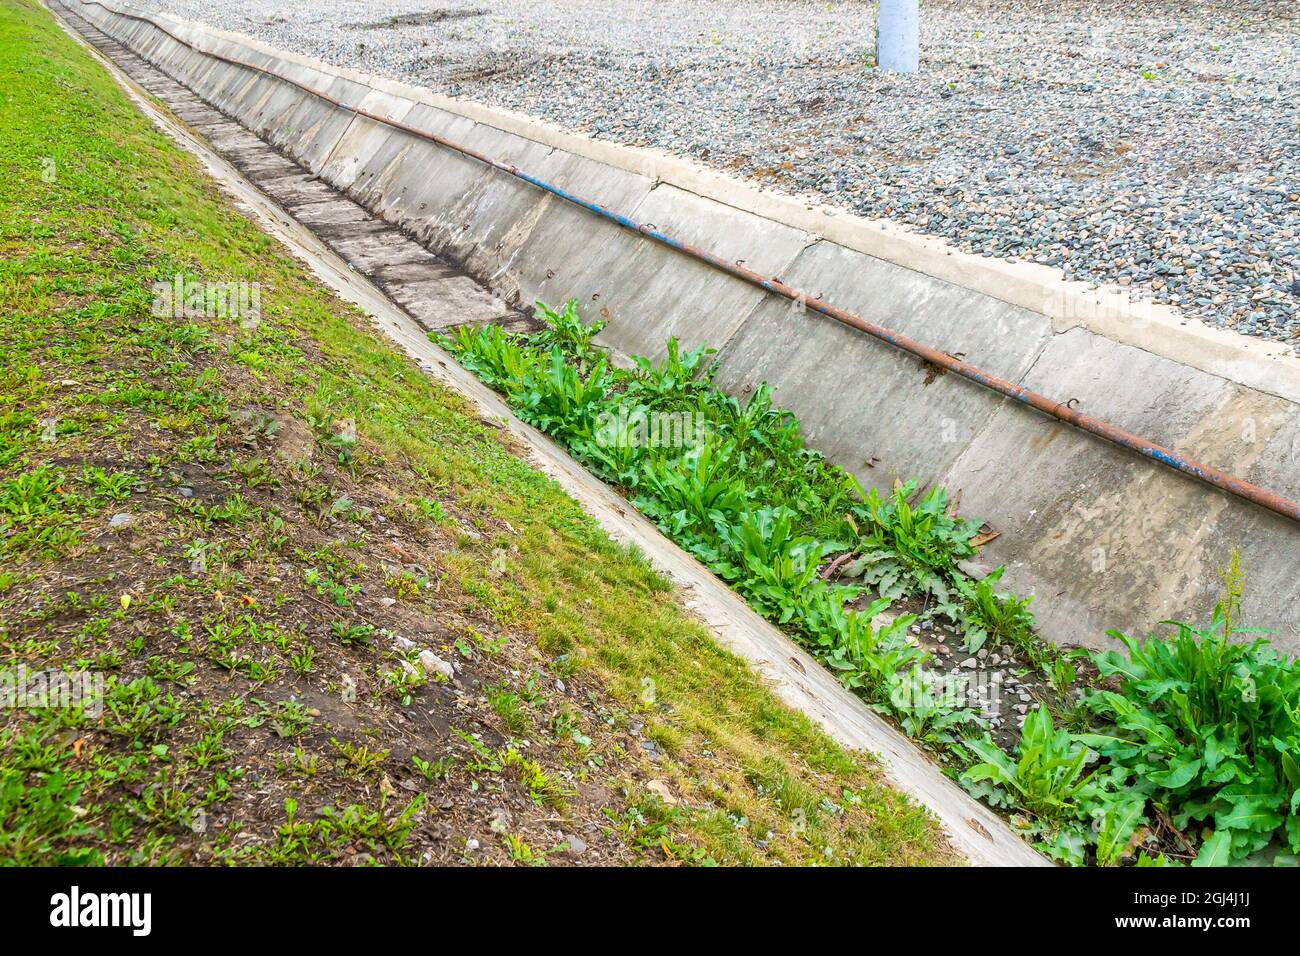 the industrial canal for drainage of rainwater and protection from flood waters was half cleared of the grass with which it was overgrown Stock Photo